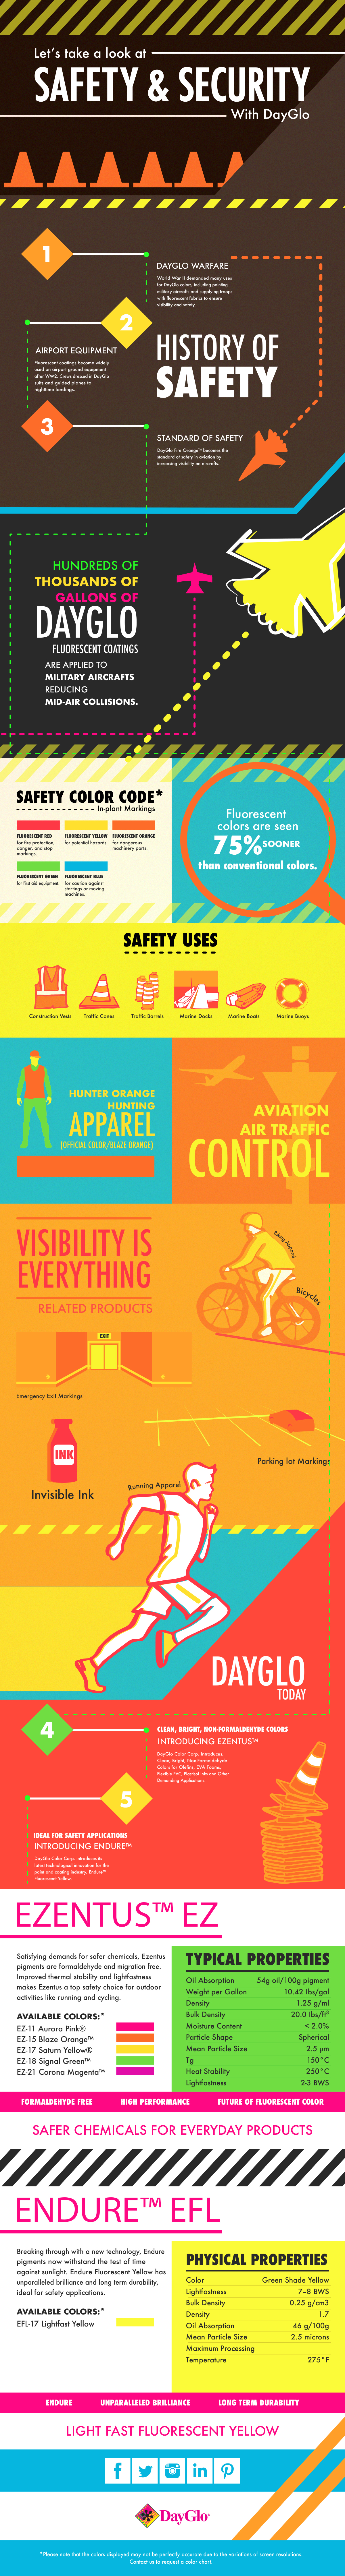 Safety and Security with DayGlo infographic